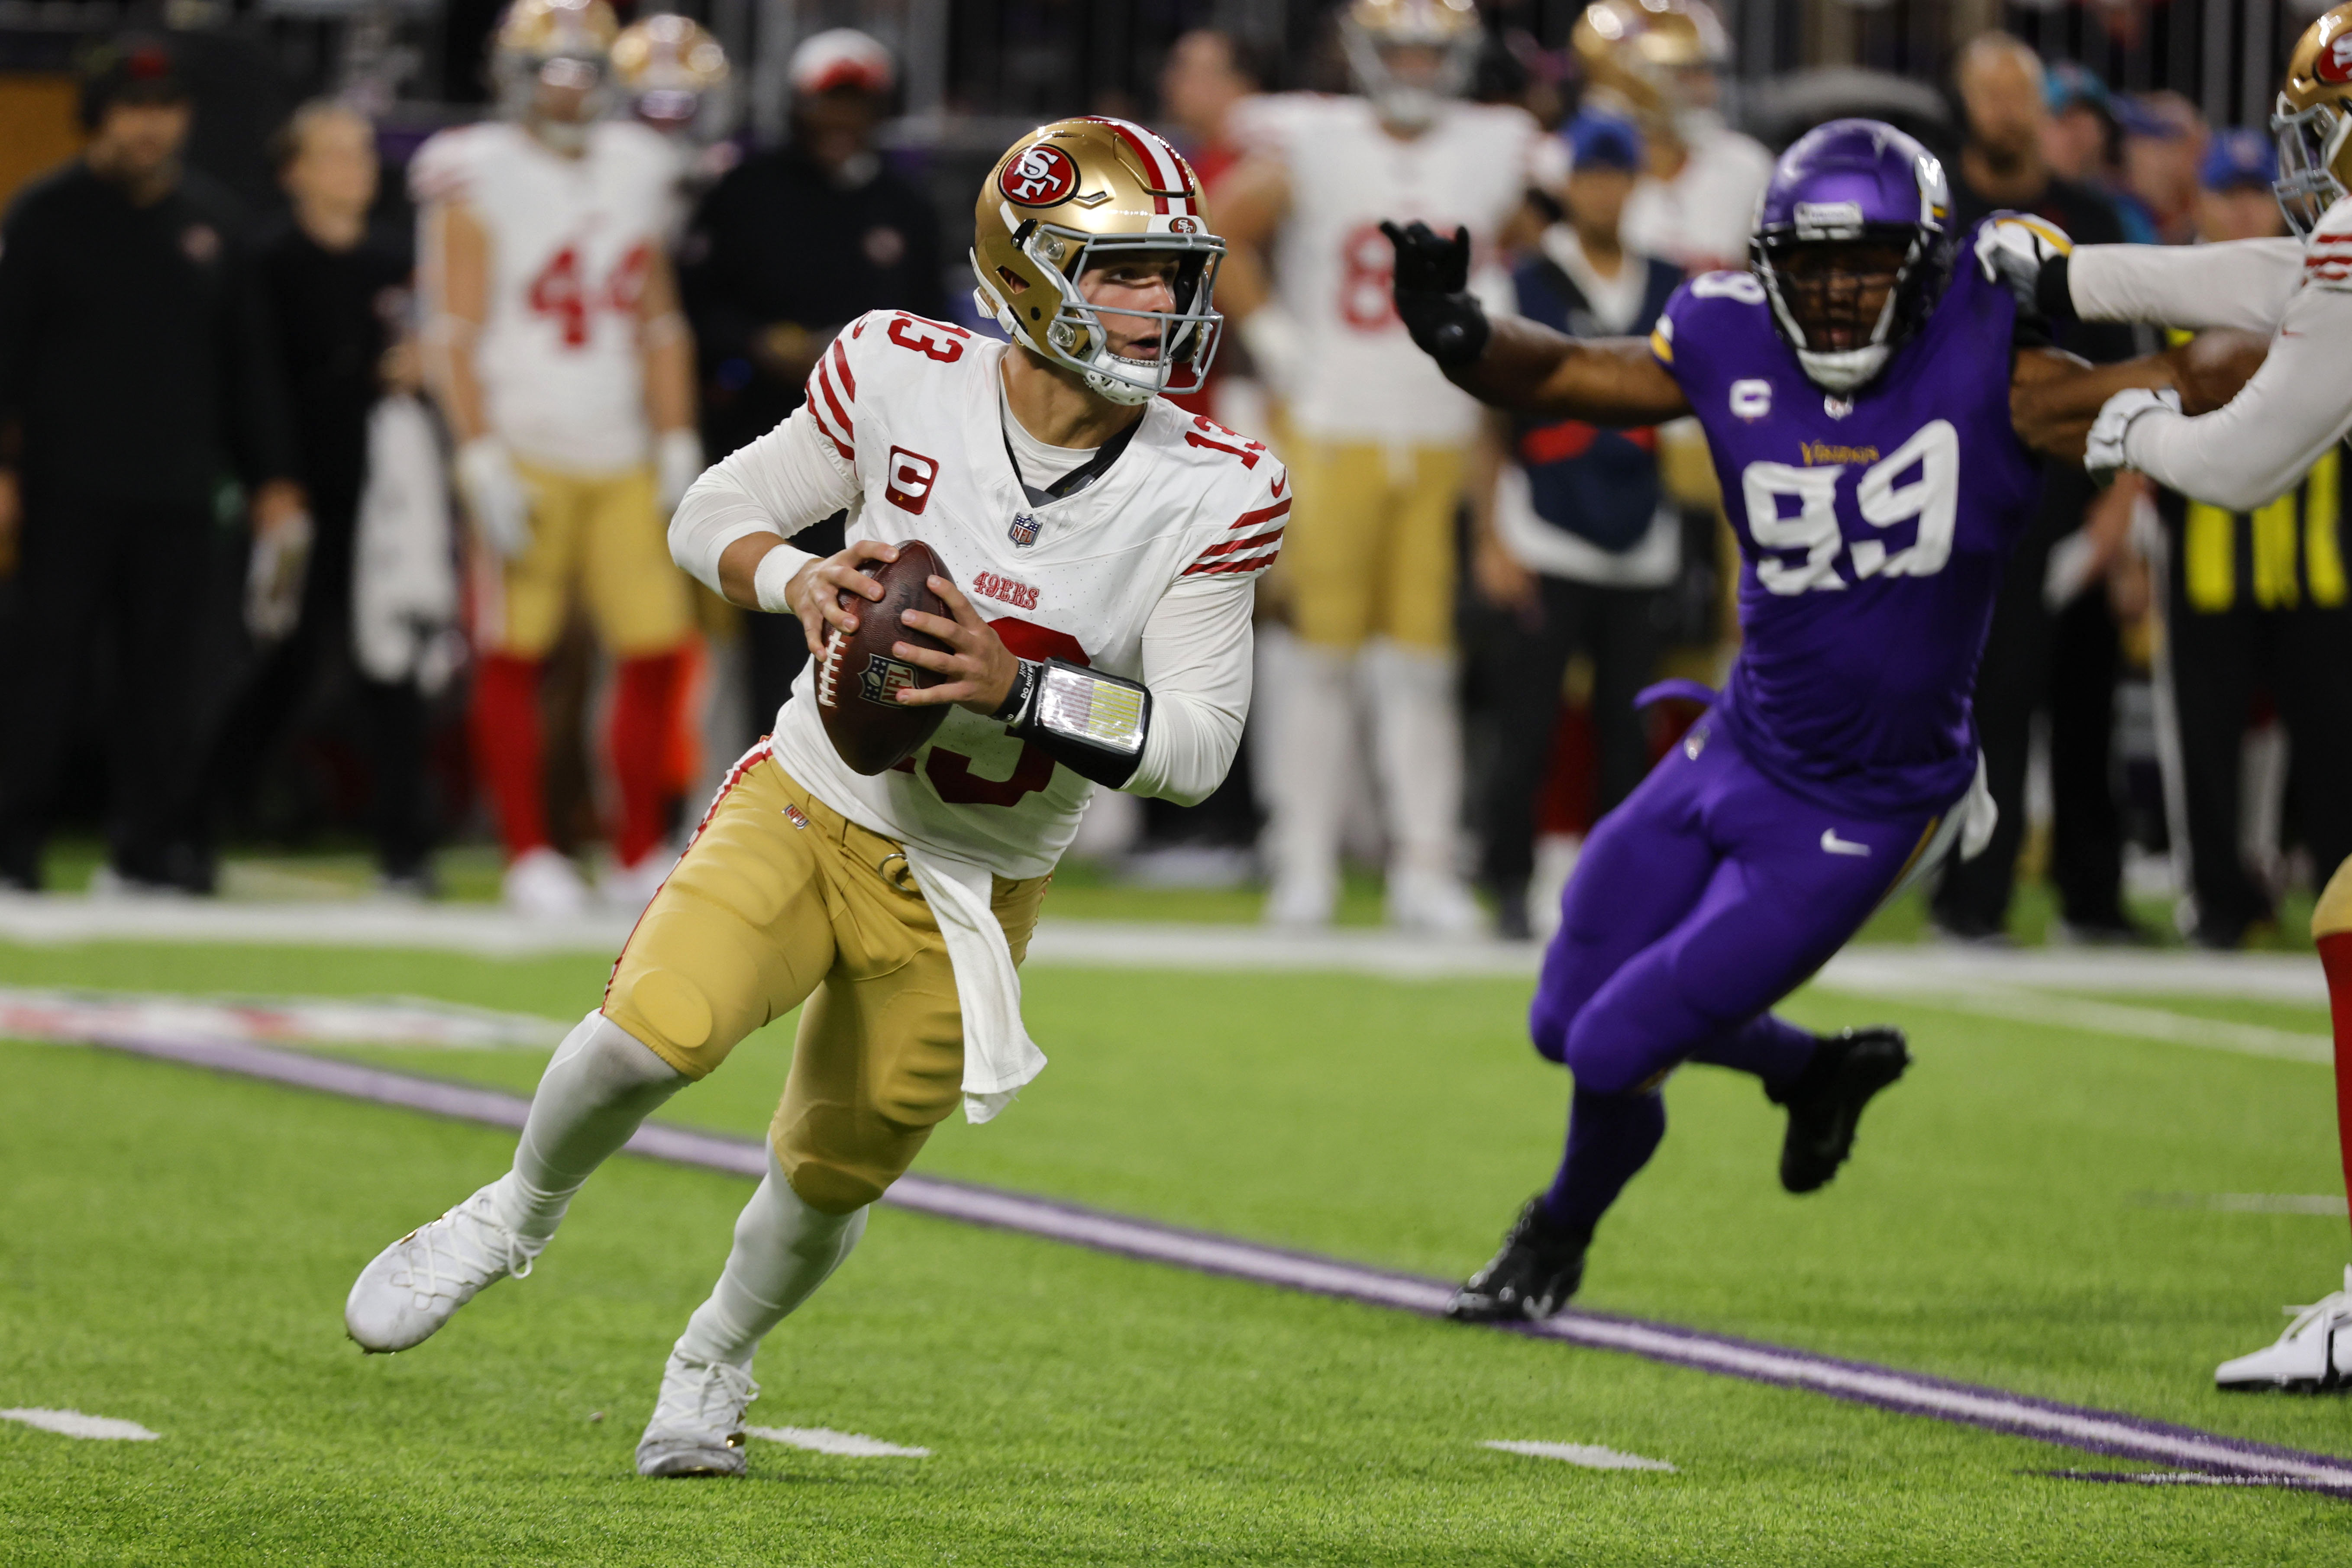 49ers news: Deebo Samuel “ready to go” for Week 10 after injury